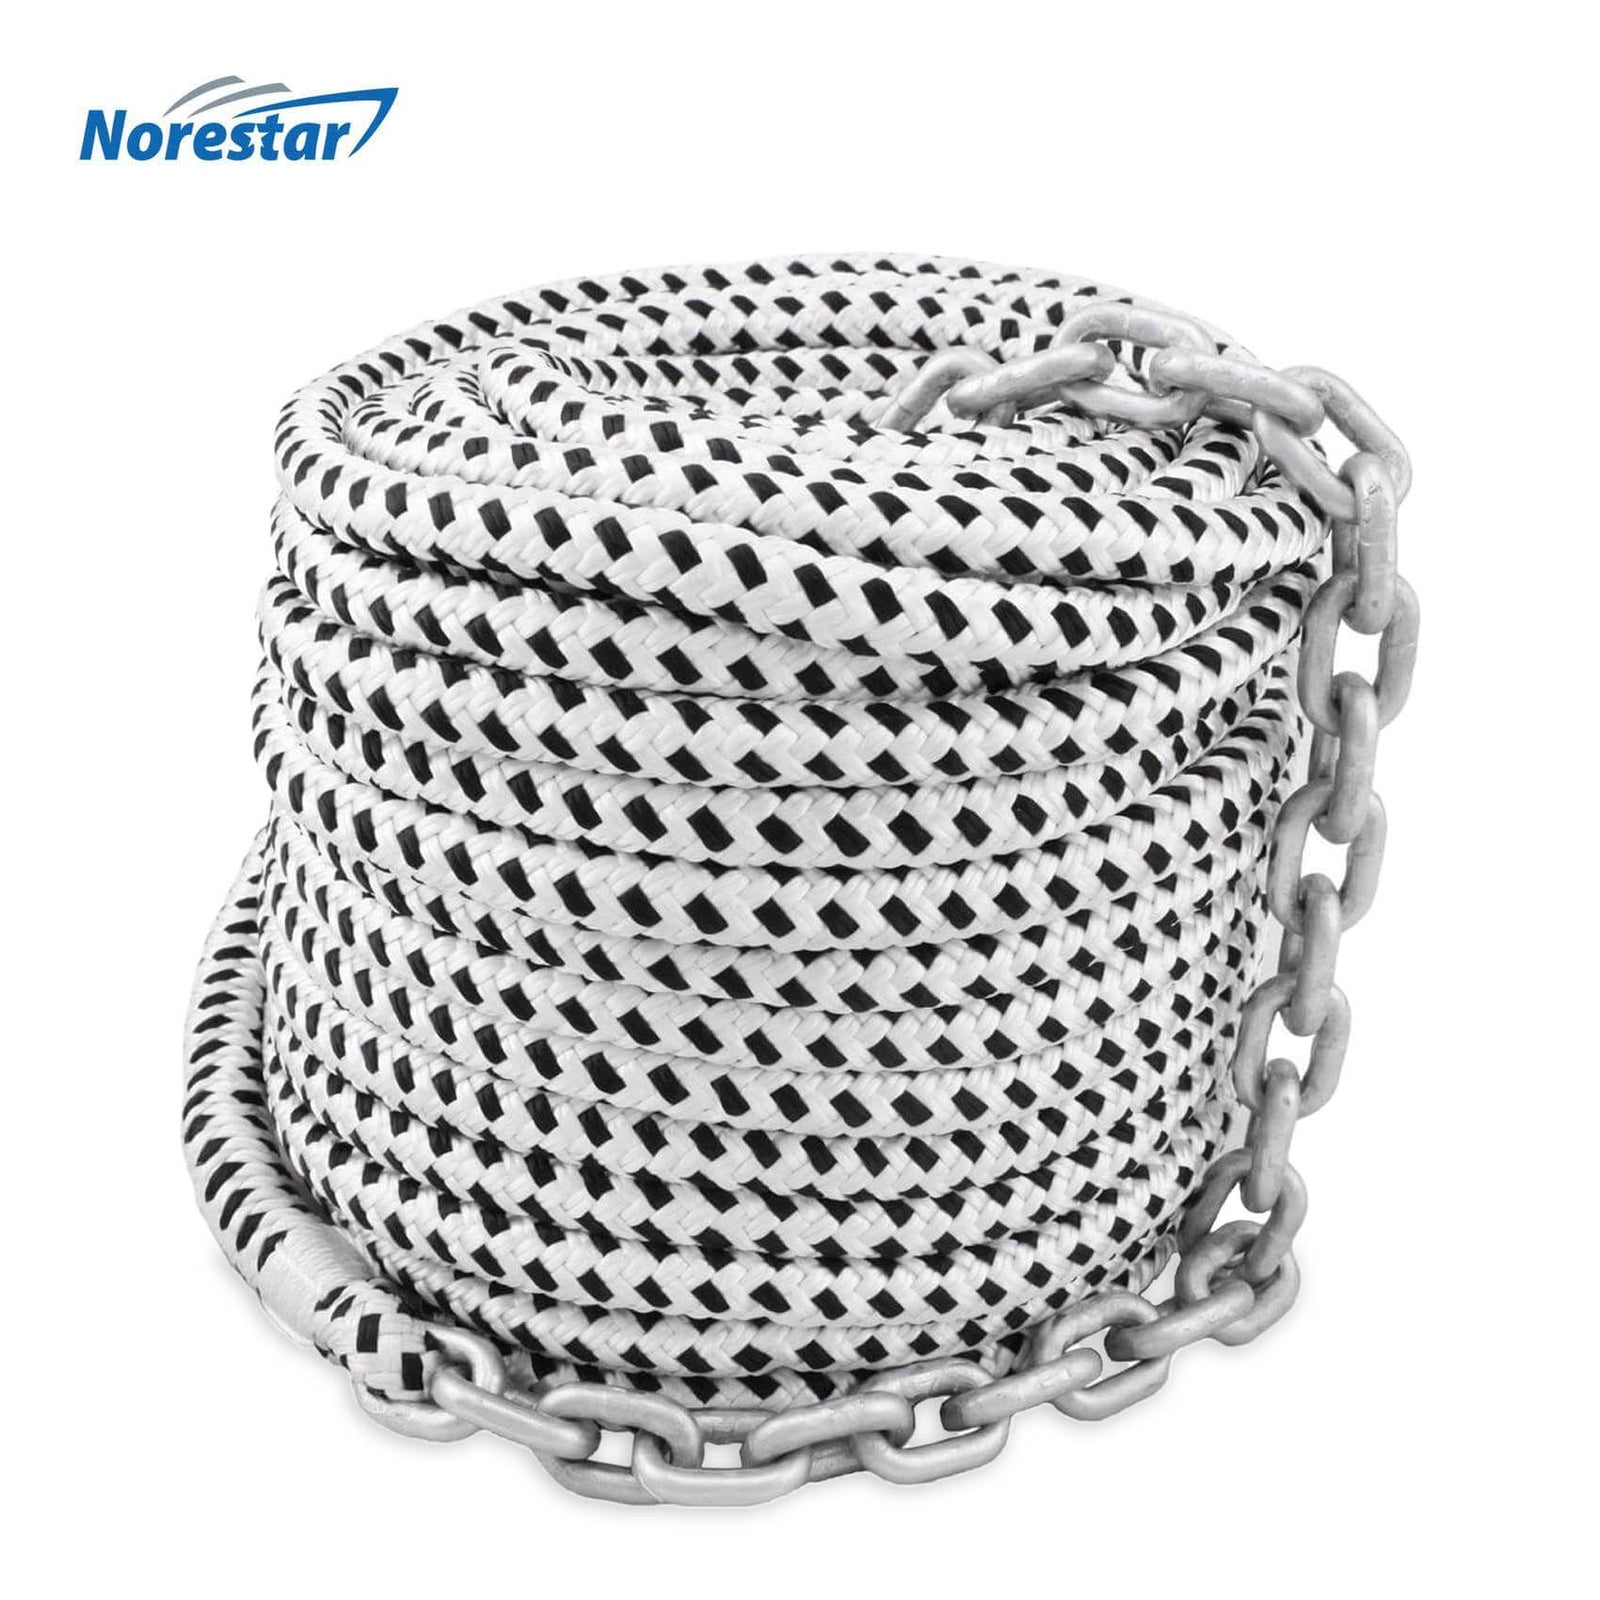 https://www.anchoring.com/cdn/shop/products/norestar-wbrht-double-braided-nylon-gs-rode-anchor-line-chain-front-angle-with-logo_001_1600x.jpg?v=1575577794